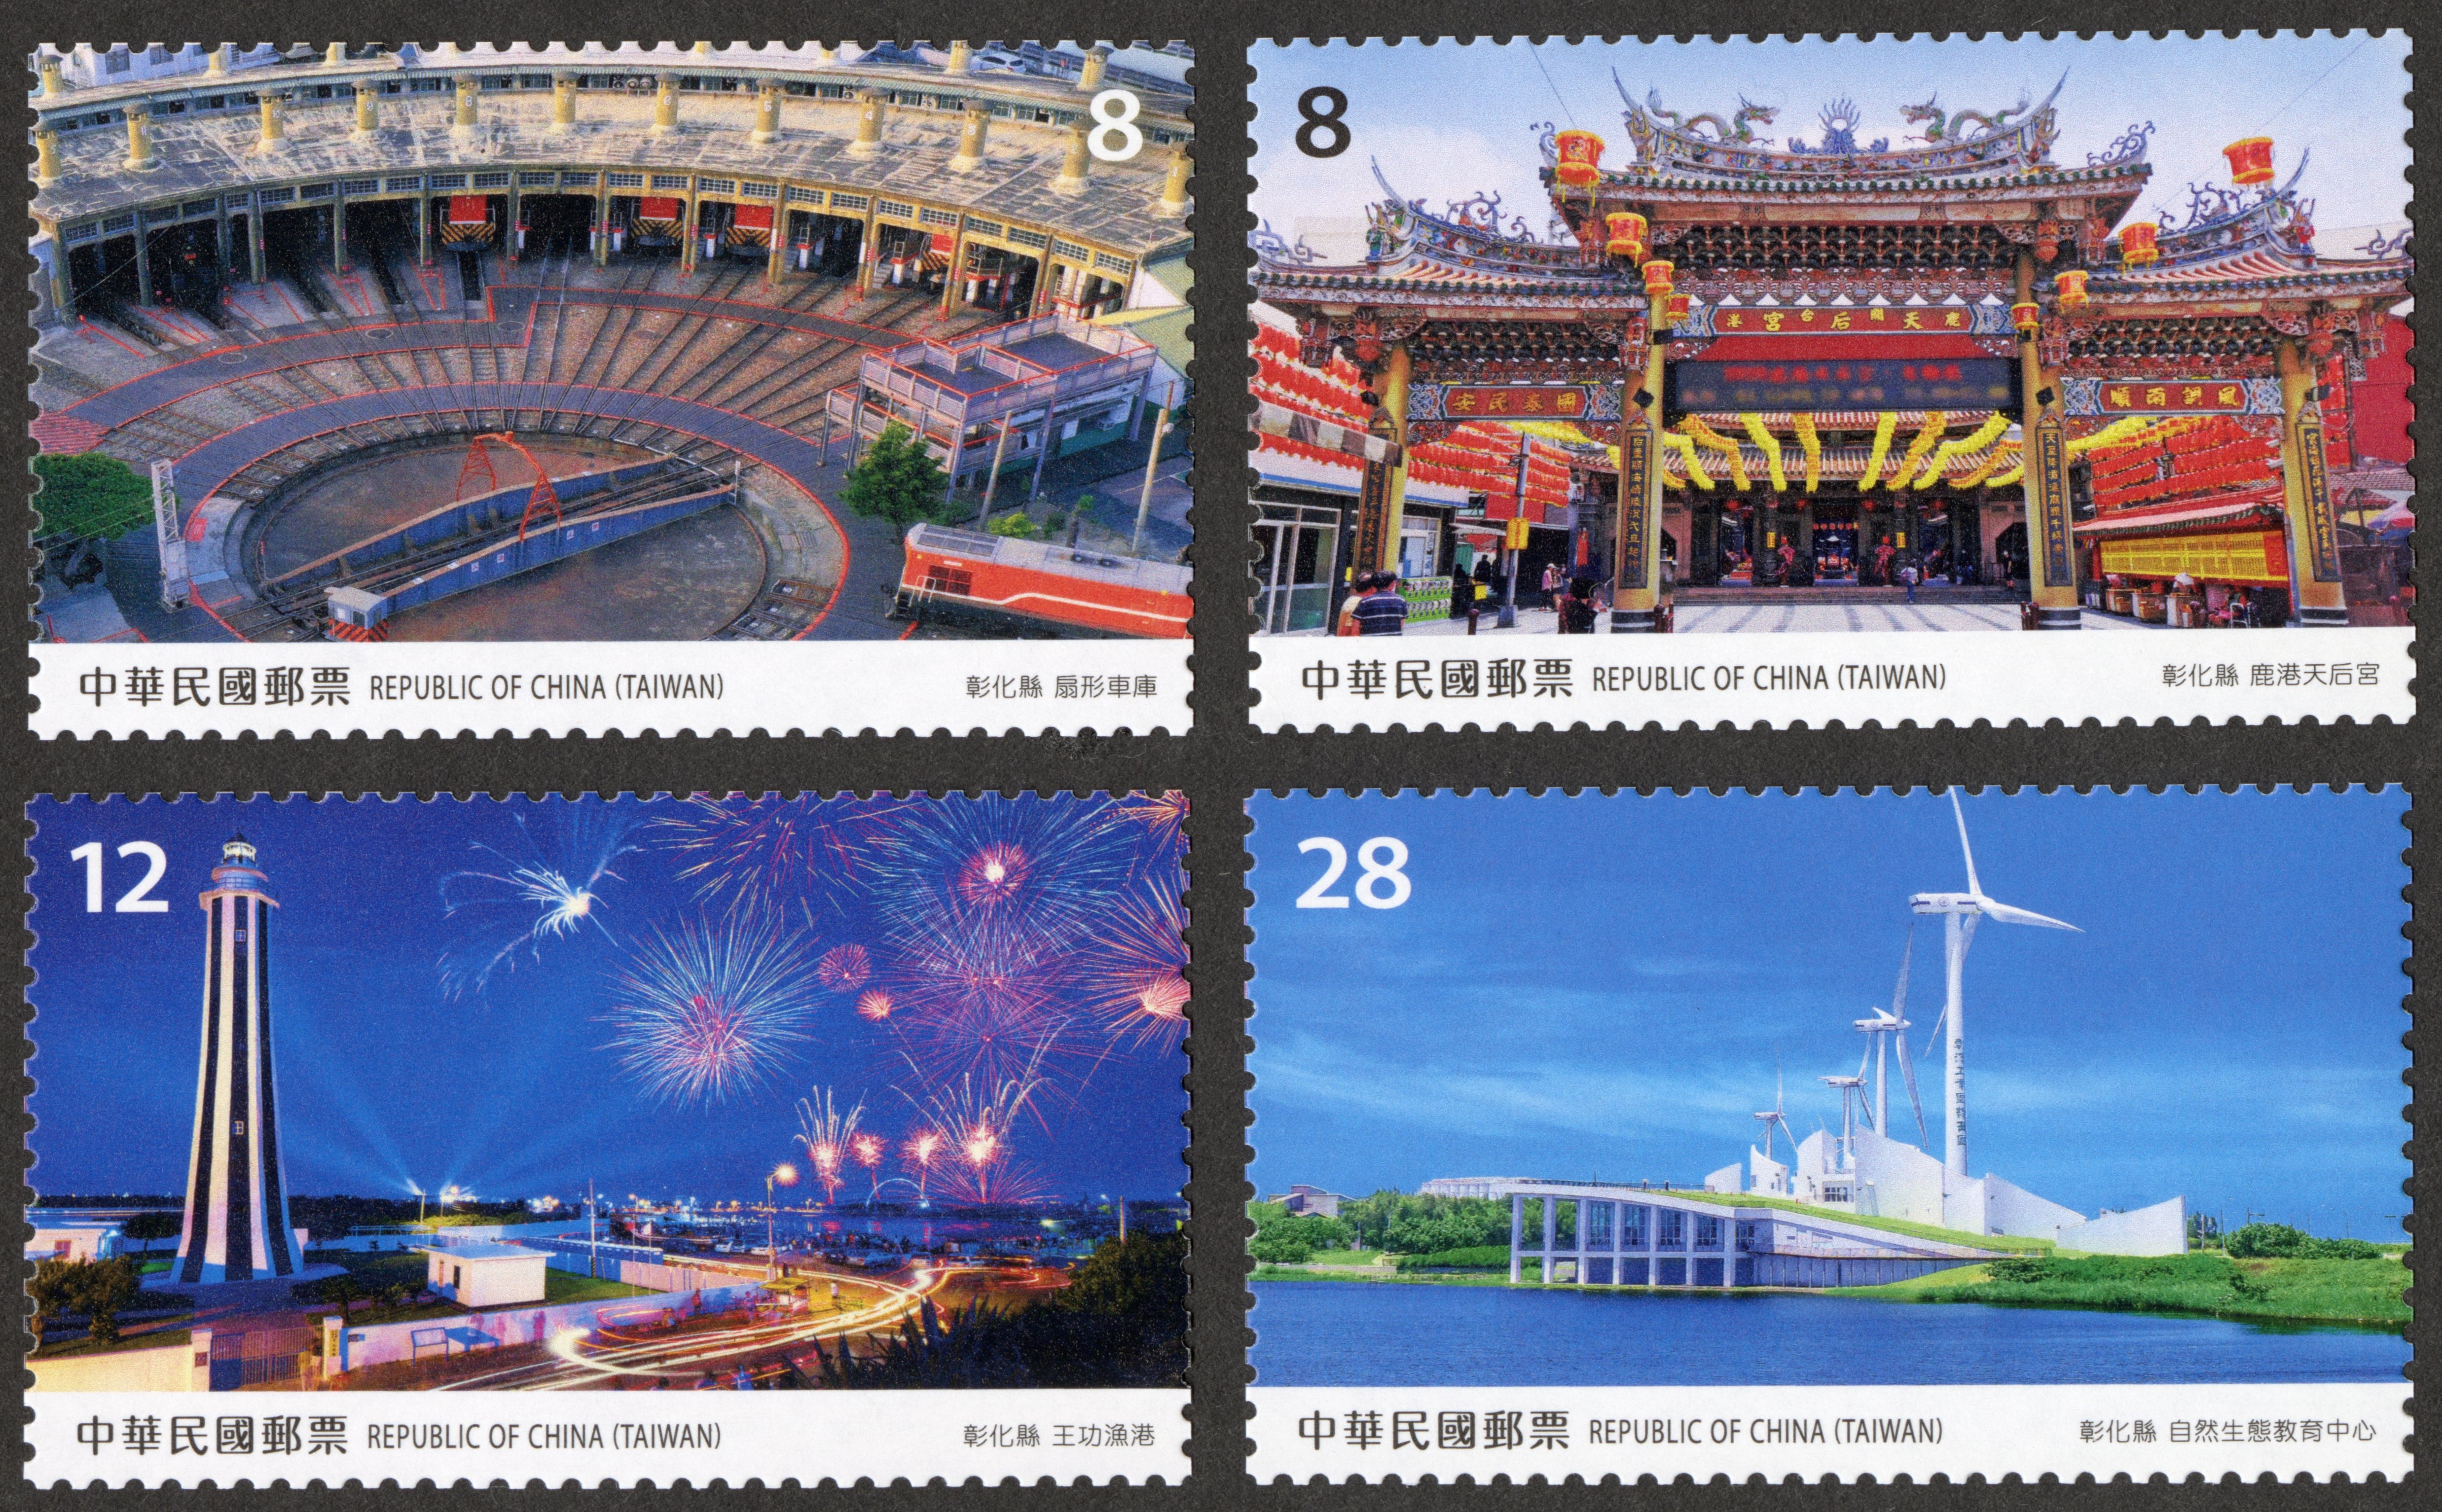 Taiwan Scenery Postage Stamps — Changhua County